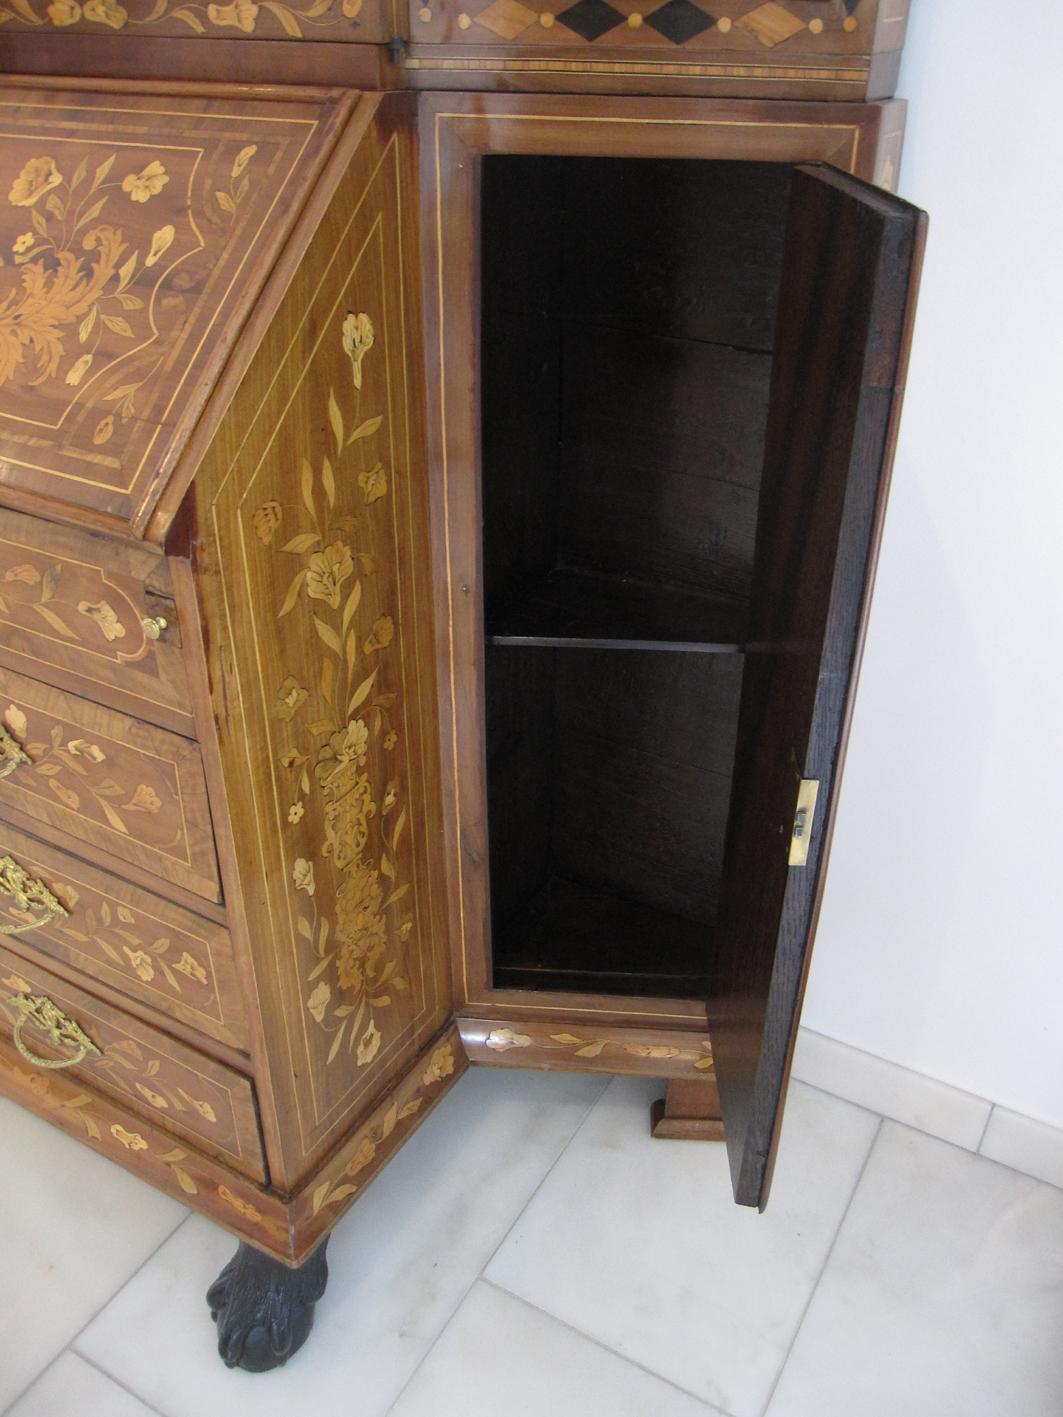 Neoclassical Early 19th Century Dutch Floral Marquetry Bureau Display Cabinet For Sale